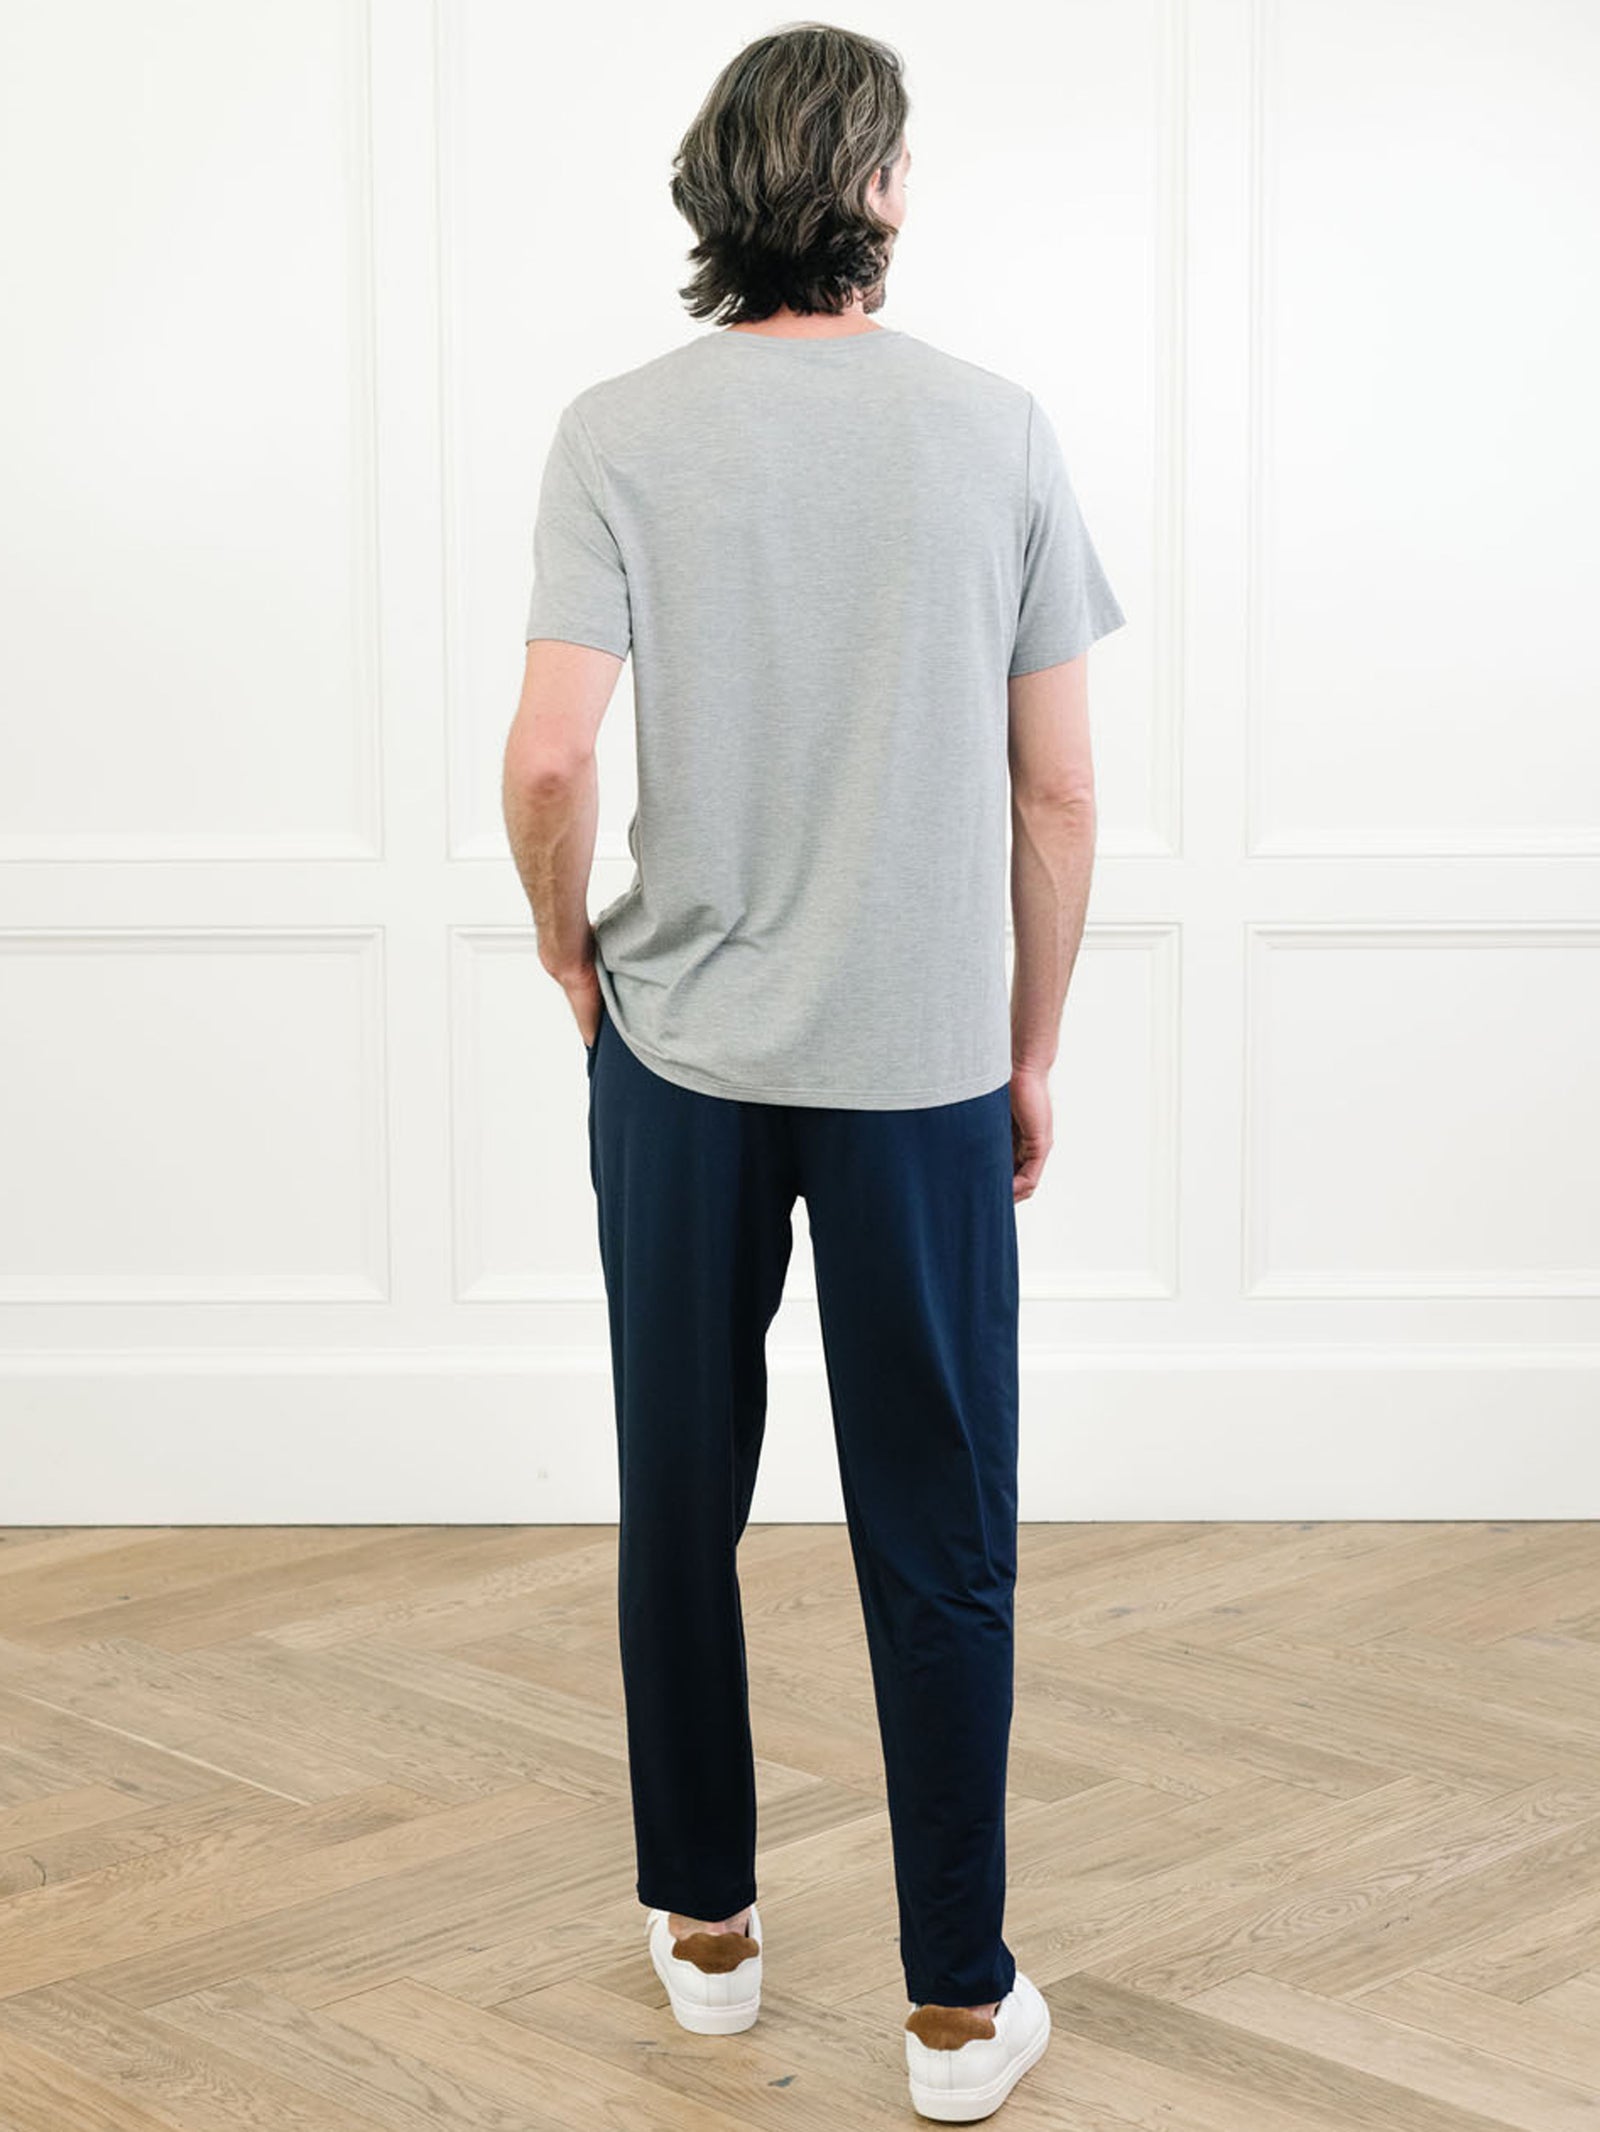 Heather grey Men's Stretch-Knit Bamboo Lounge Tee. A man is wearing the lounge tee in a well lit home with his back facing the camera.